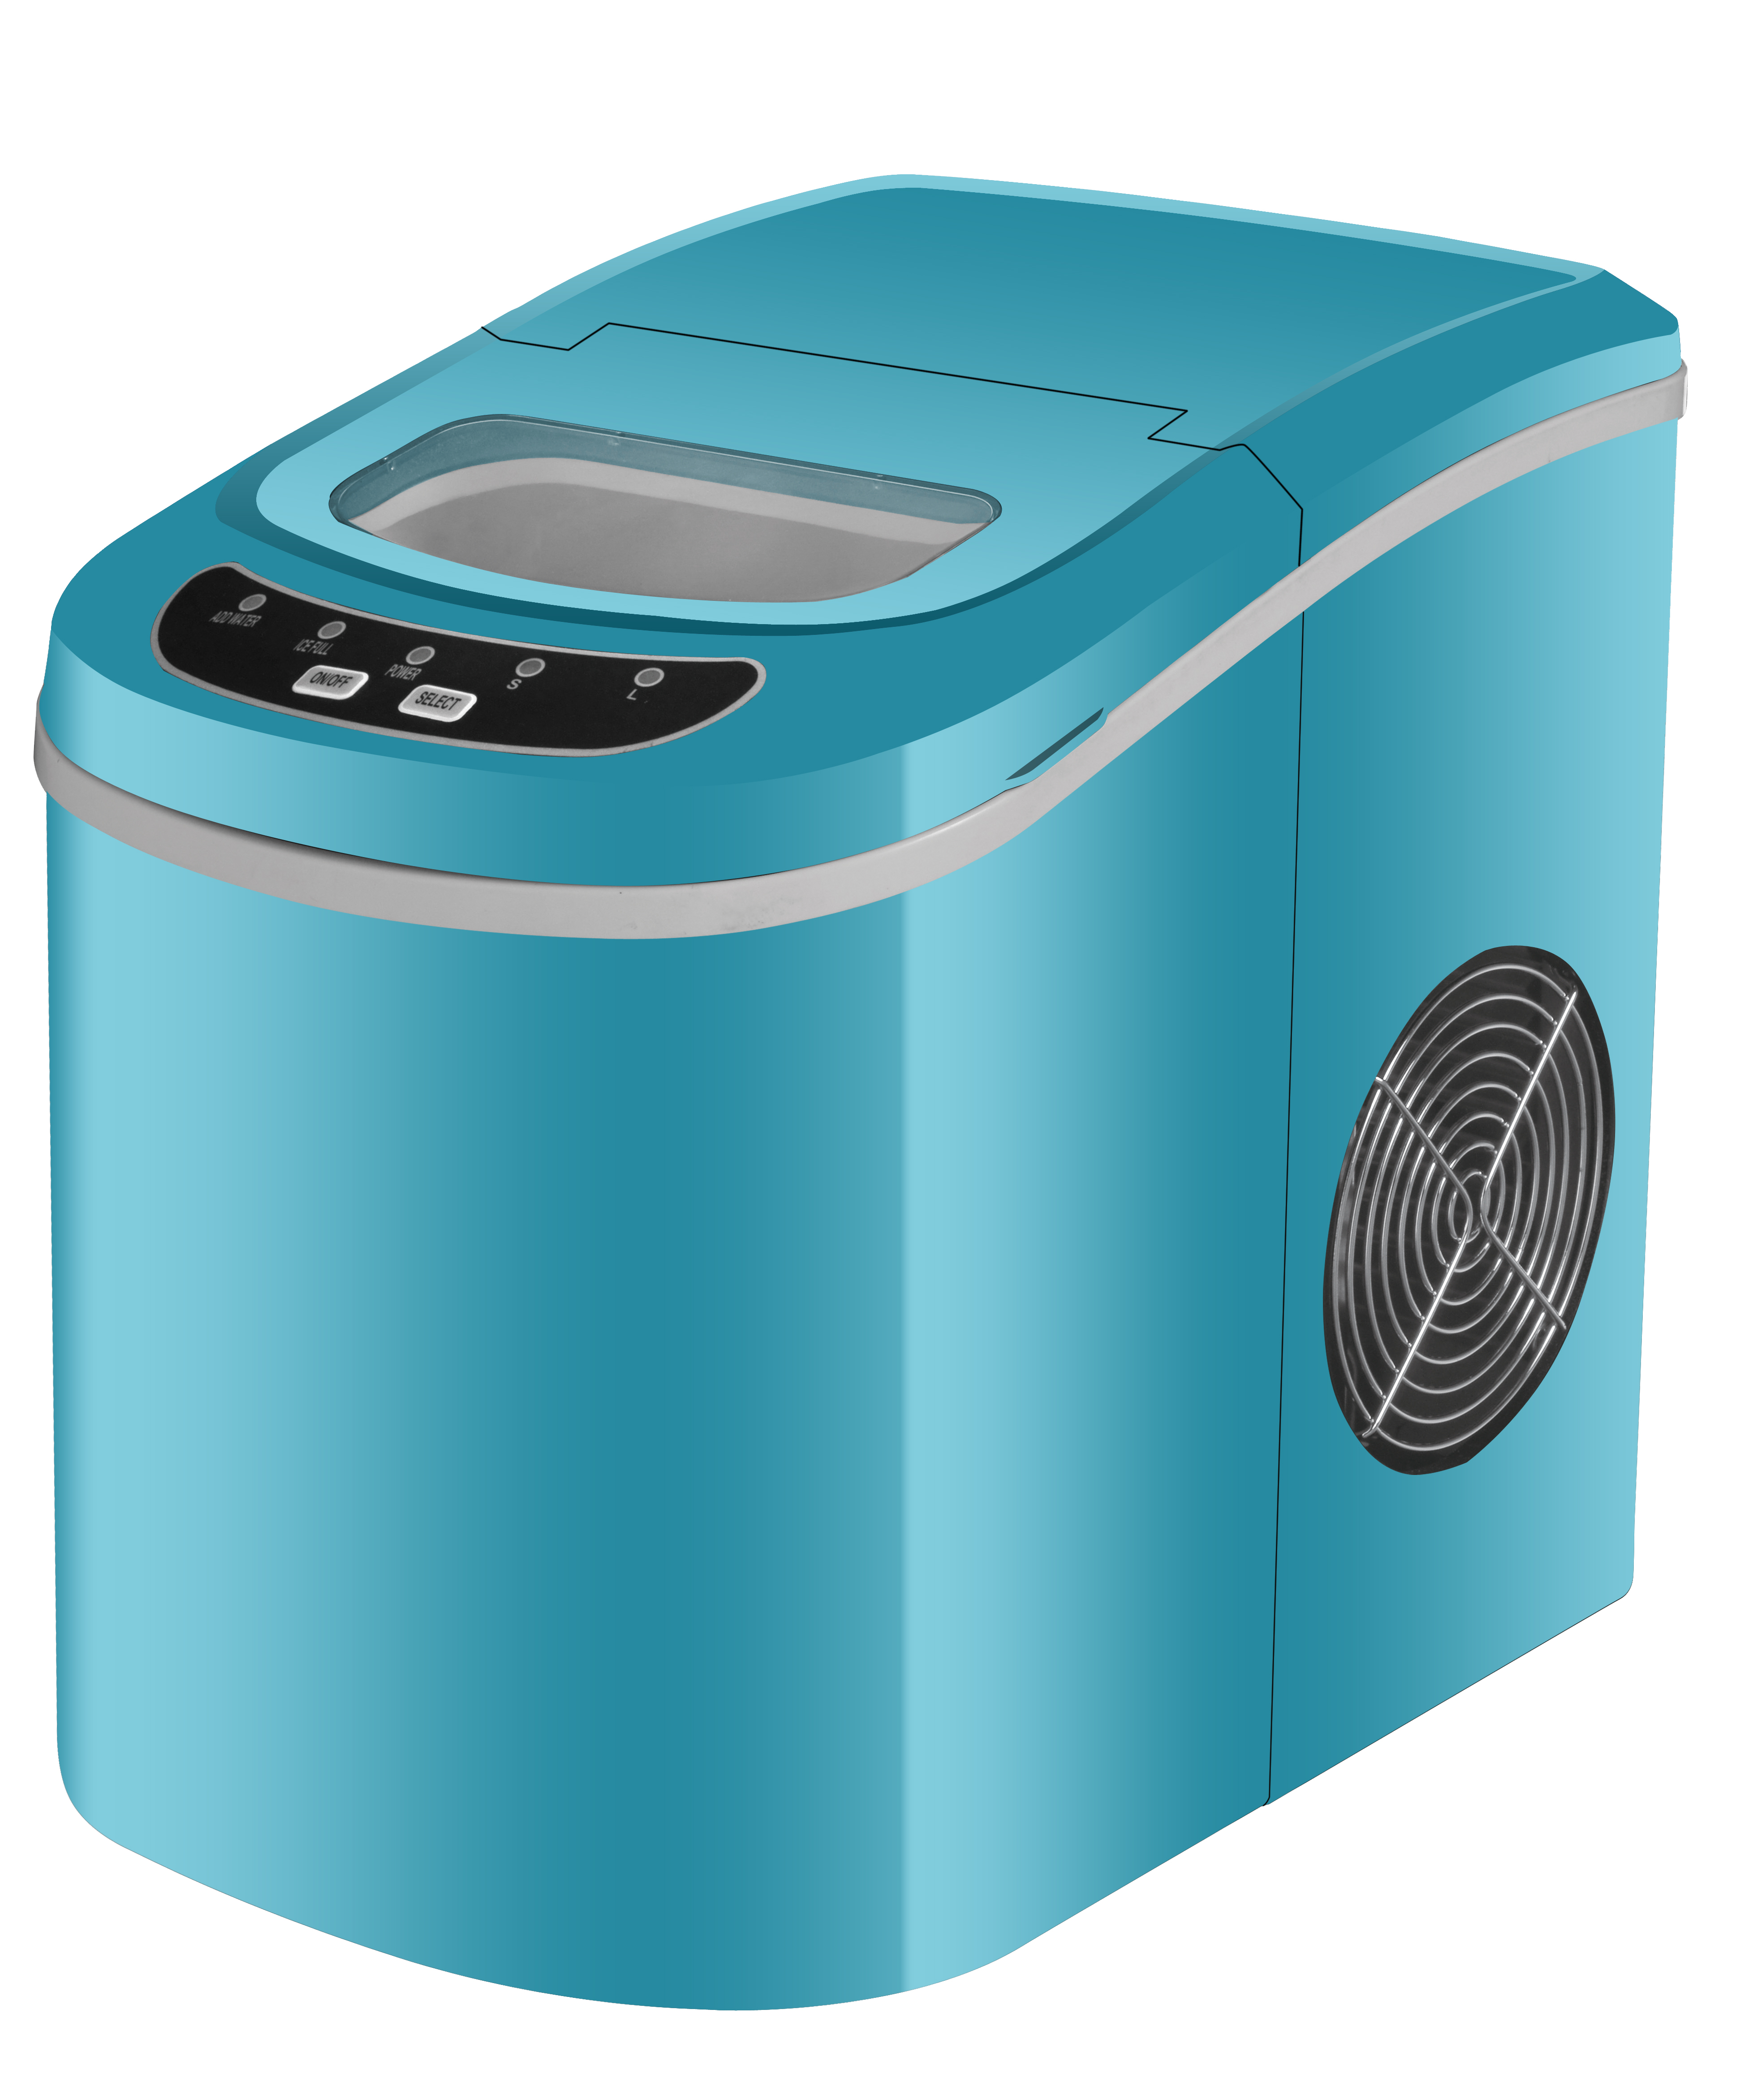 What are the features of the cooling system of ice cream makers